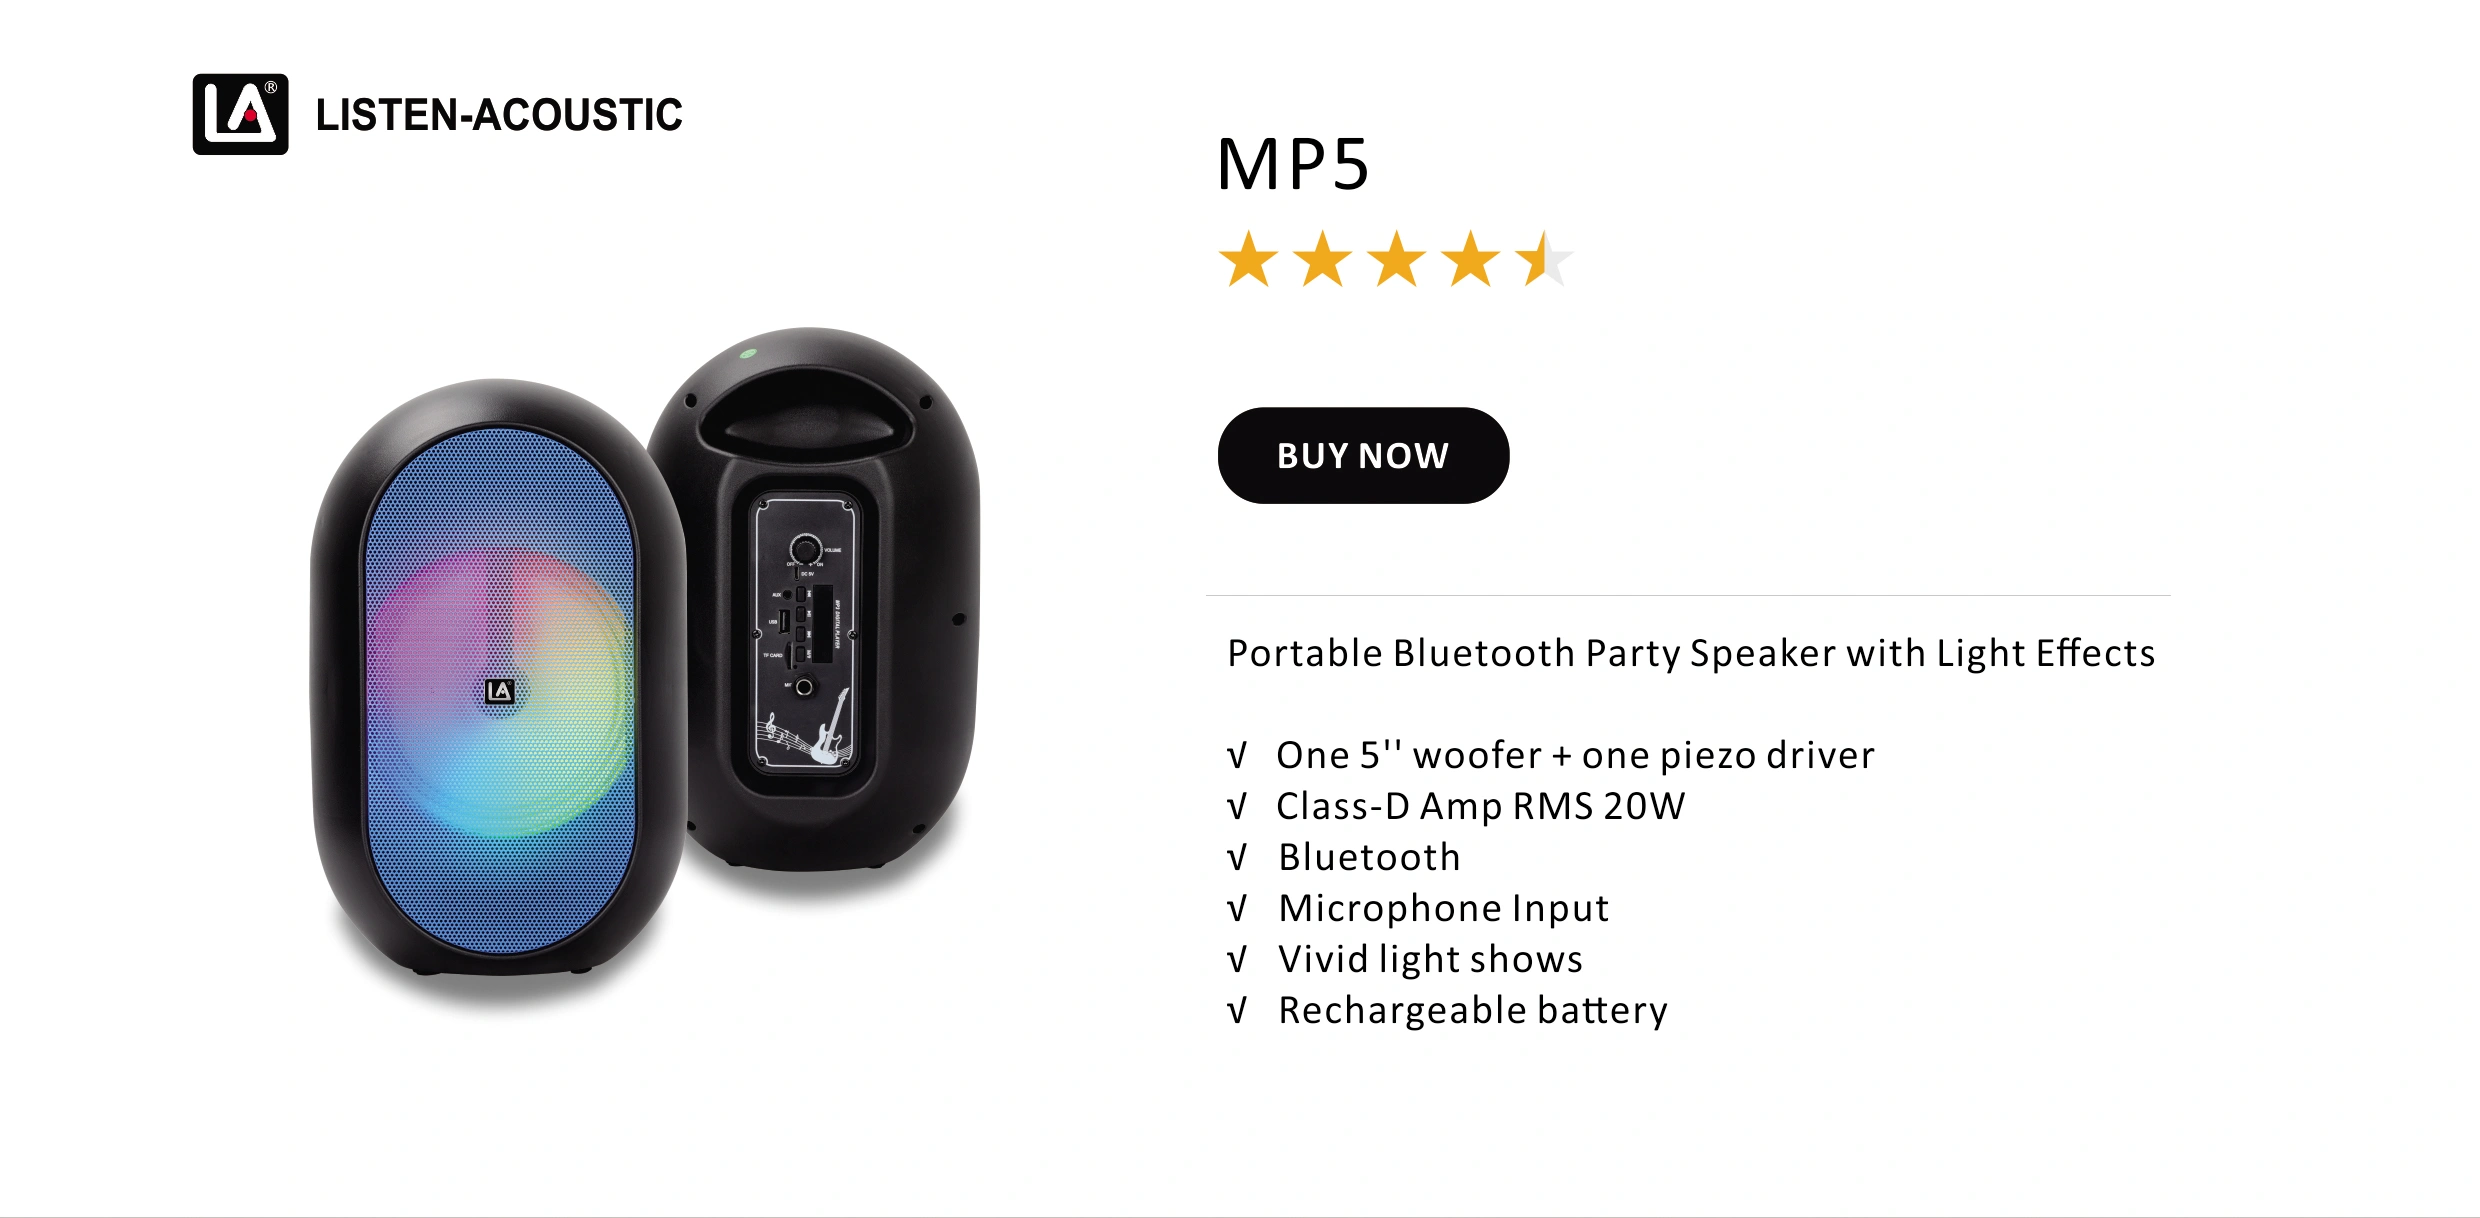 MP5 Portable Bluetooth Party Speaker with Light Effects